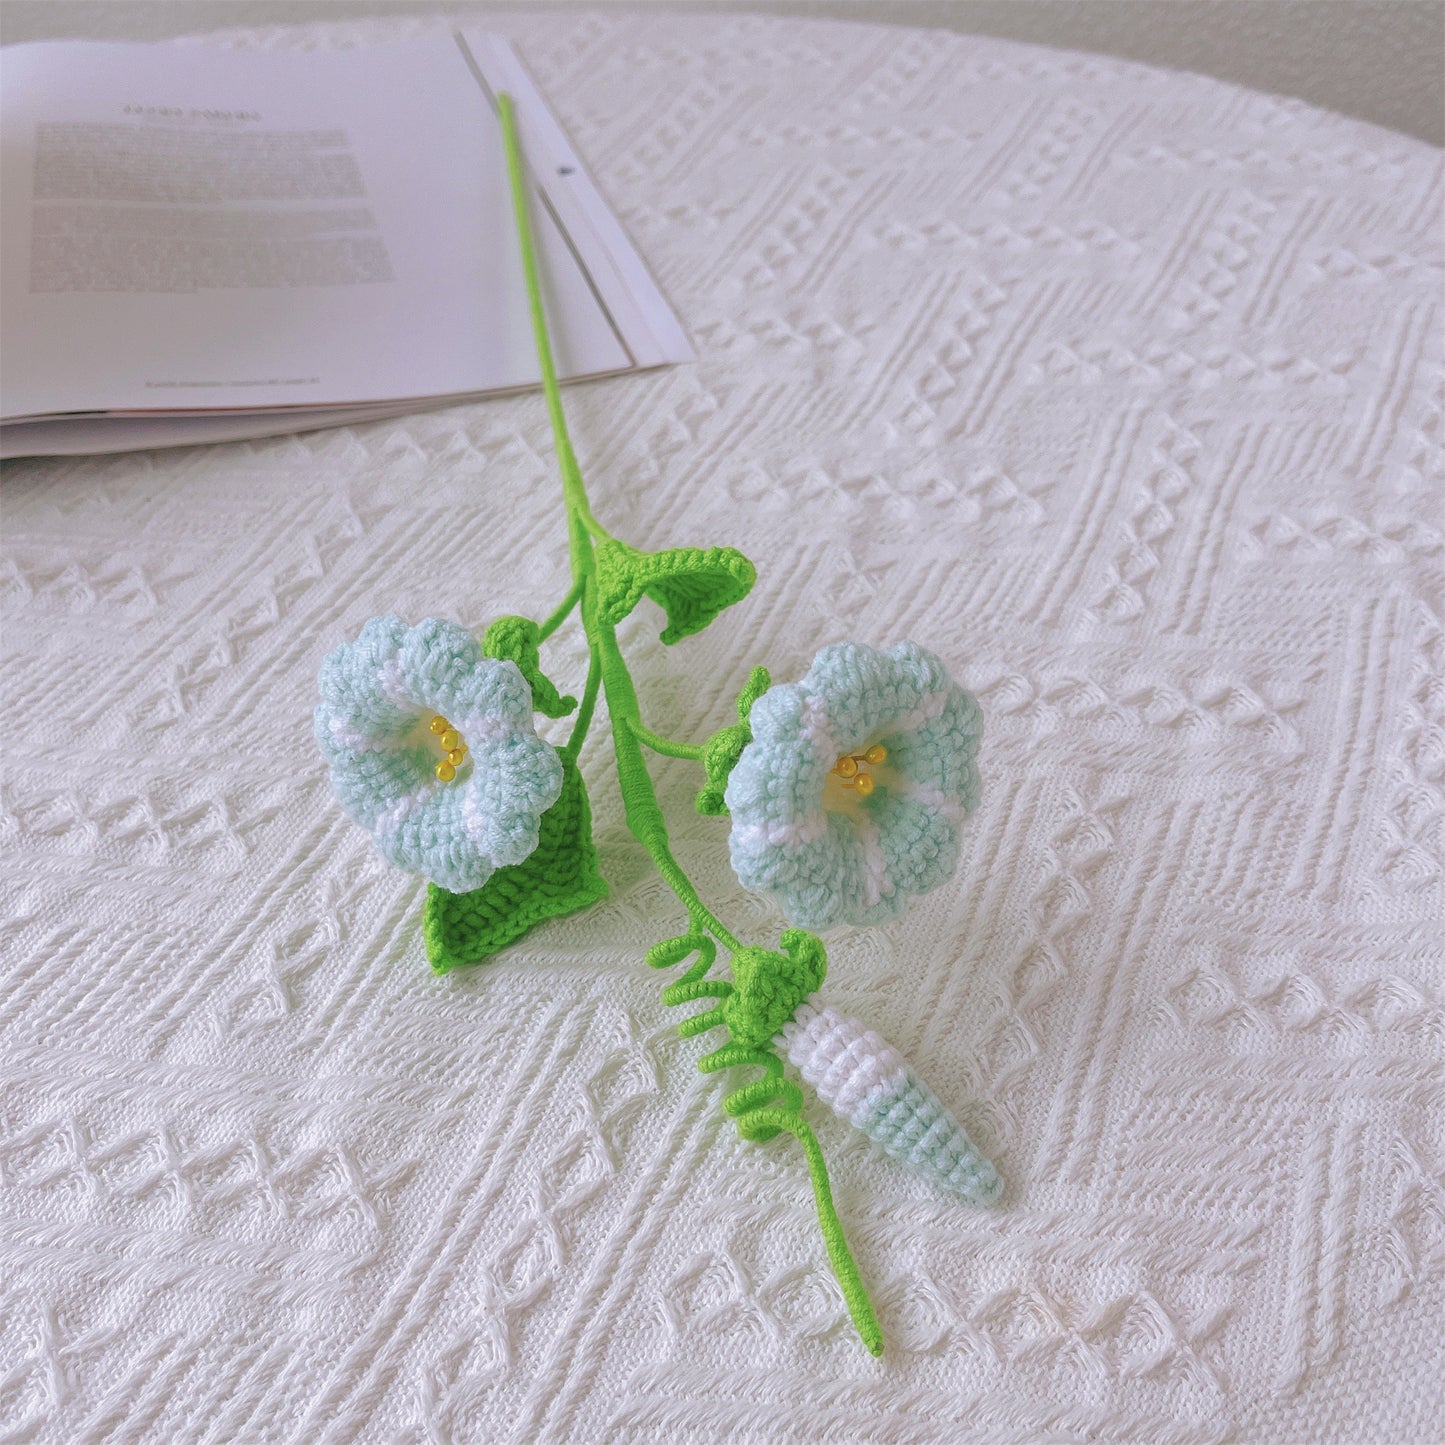 September Birth Month Morning Glory Birthday Bouquet - Handcrafted Hooked Single Stem Crochet - Ideal for Garden Lovers or 9th Month Celebrations